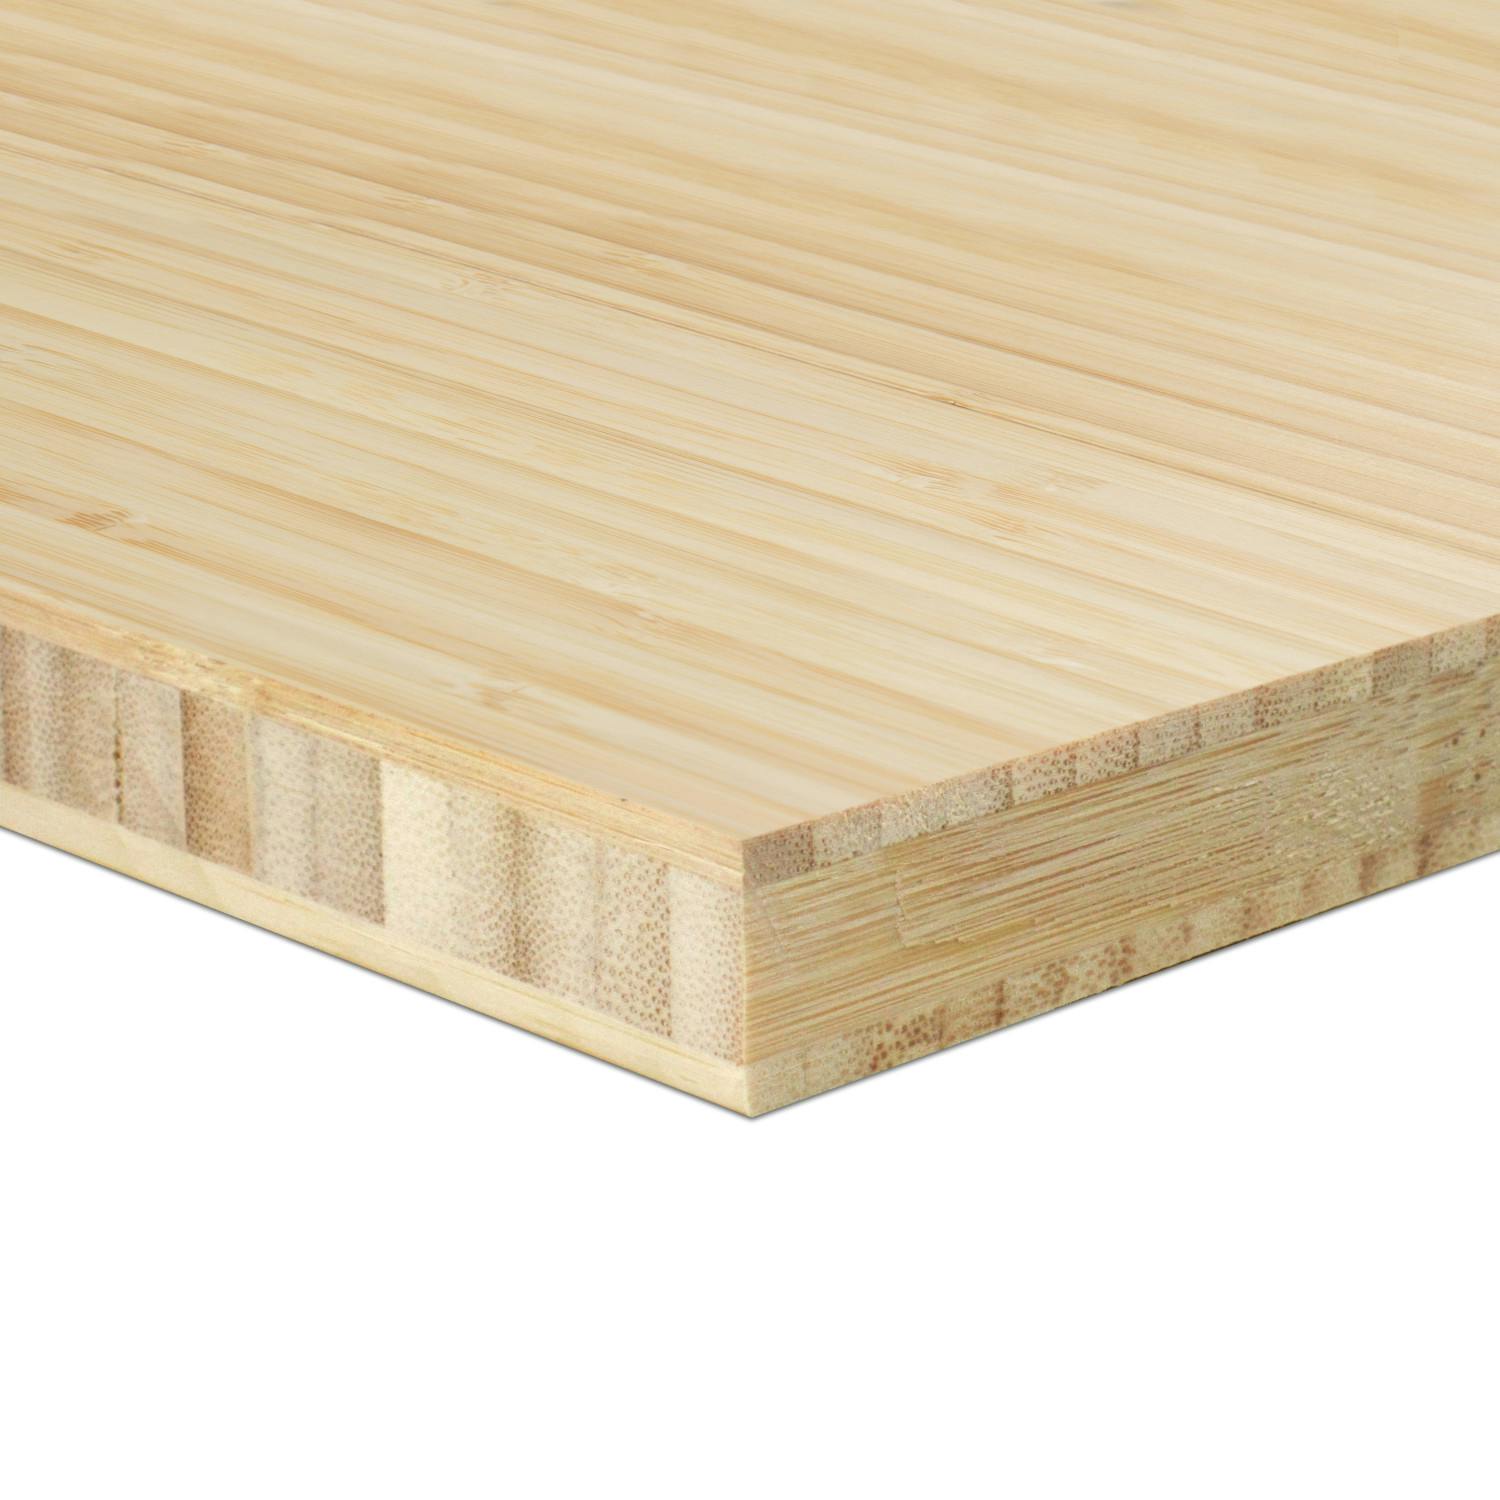 Bamboo Plywood - 3ply 3/4 in. Vertical Natural